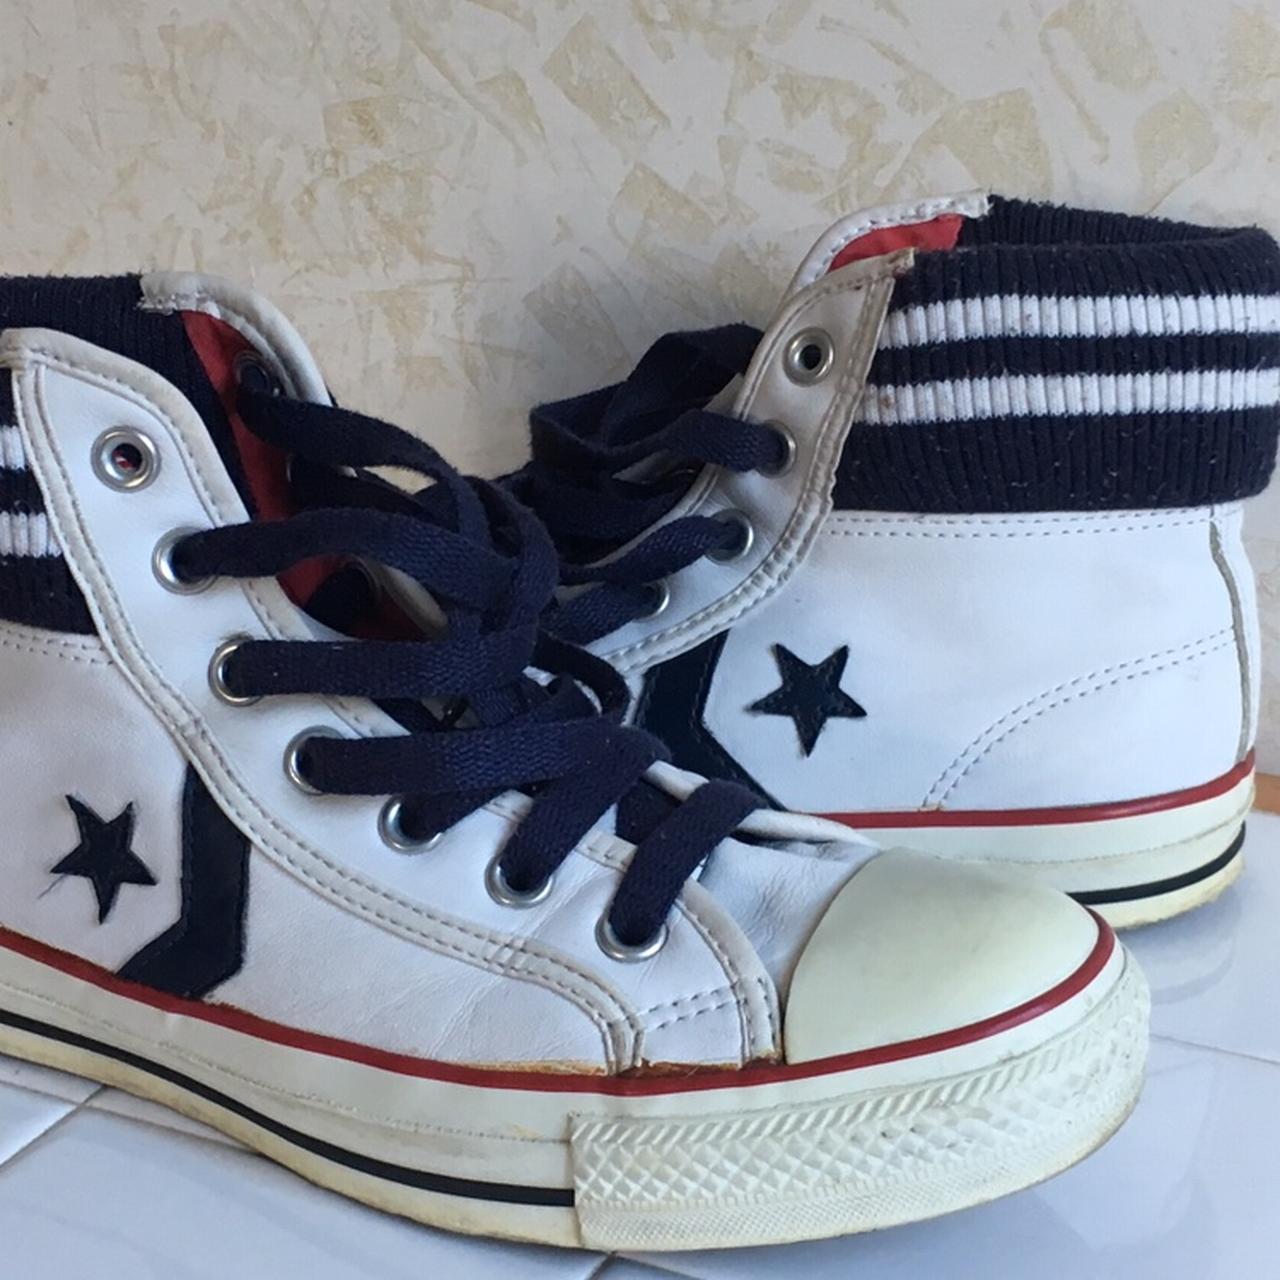 Converse Women's Navy and White Trainers (2)